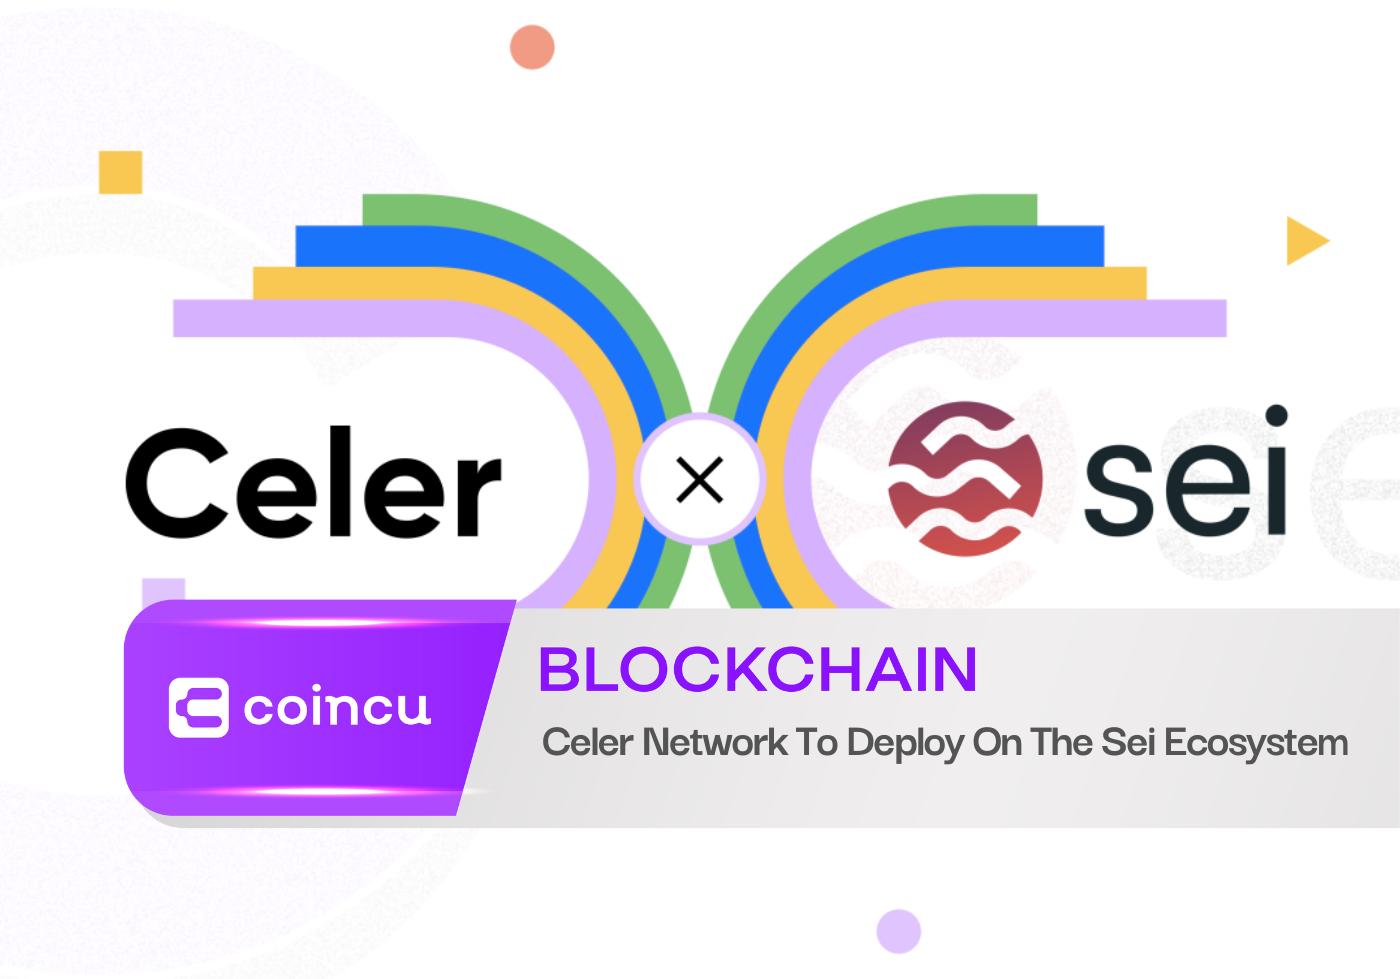 Celer Network To Deploy On The Sei Ecosystem